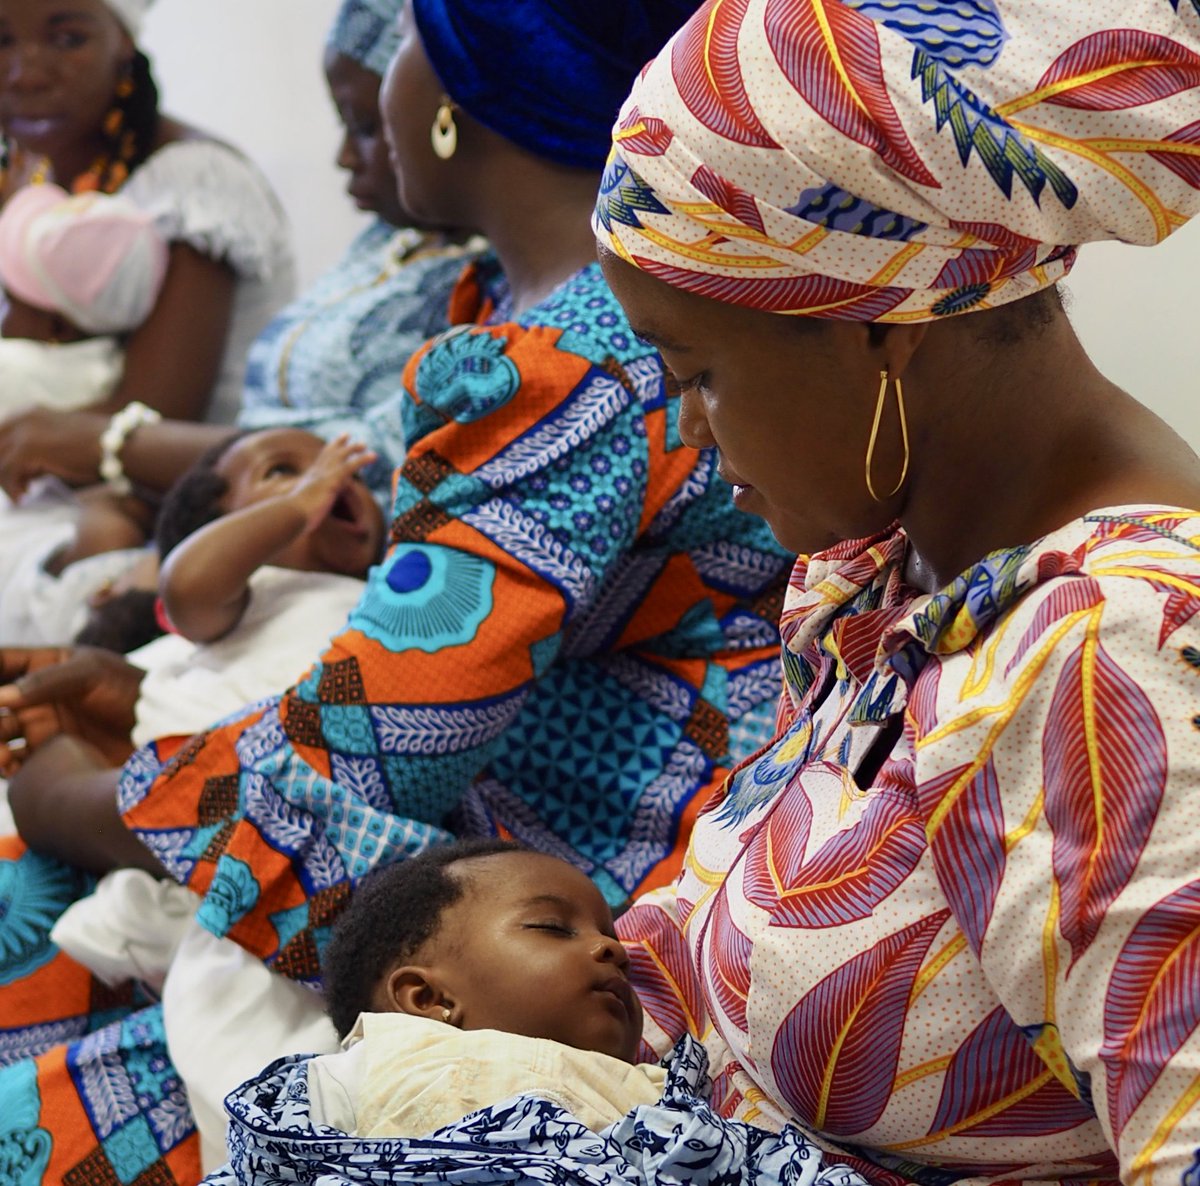 Another group of #healthymothers and #babies during our #postnatal meeting at Tamale Teaching Hospital! #blessed #antenataleducation #pregnancyeducation #postnatalcare #safedelivery #mothers #healthybabies #africandress #africanprint #Africa #Ghana #Tamale